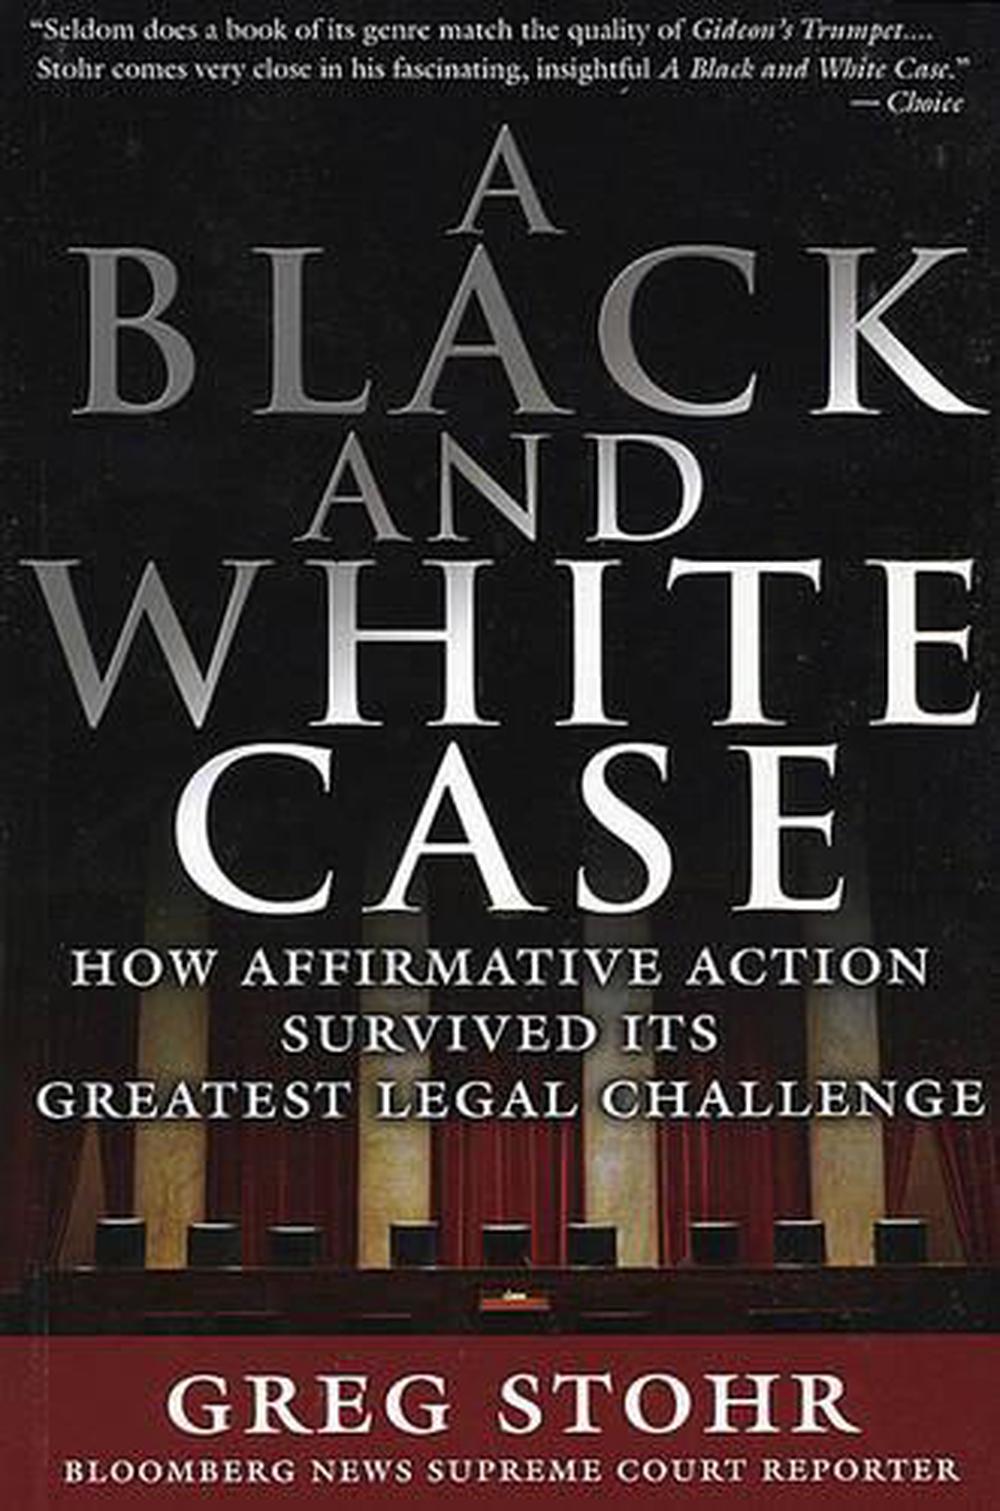 A Black and White Case: How Affirmative Action Survived Its Greatest Legal Chall 9781576602270 ...